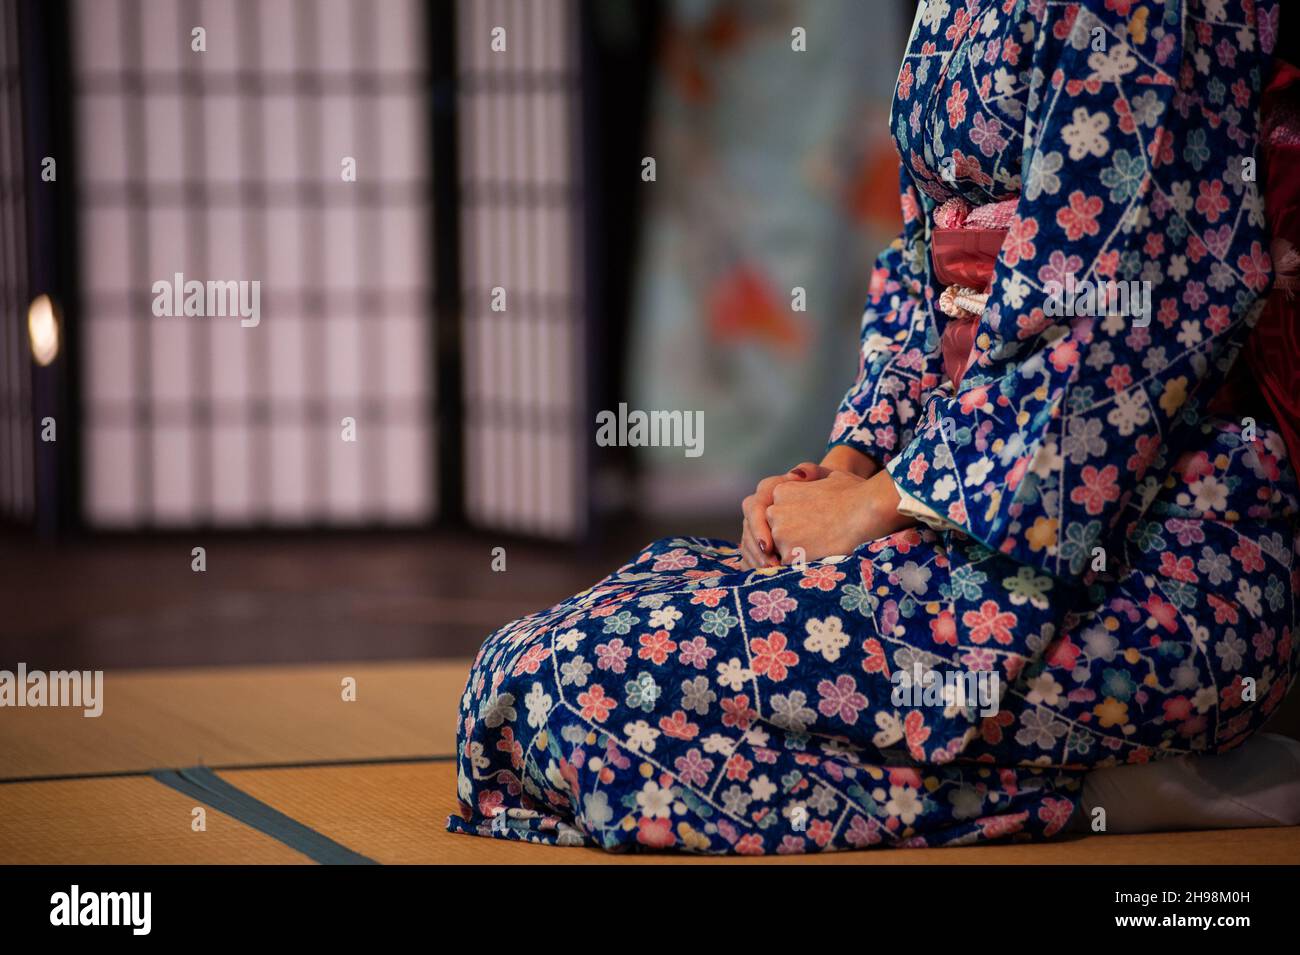 Woman in traditional kimono, kneeling position. Seiza is the formal way of sitting down based on ancient Japanese standards. Copy space. Stock Photo